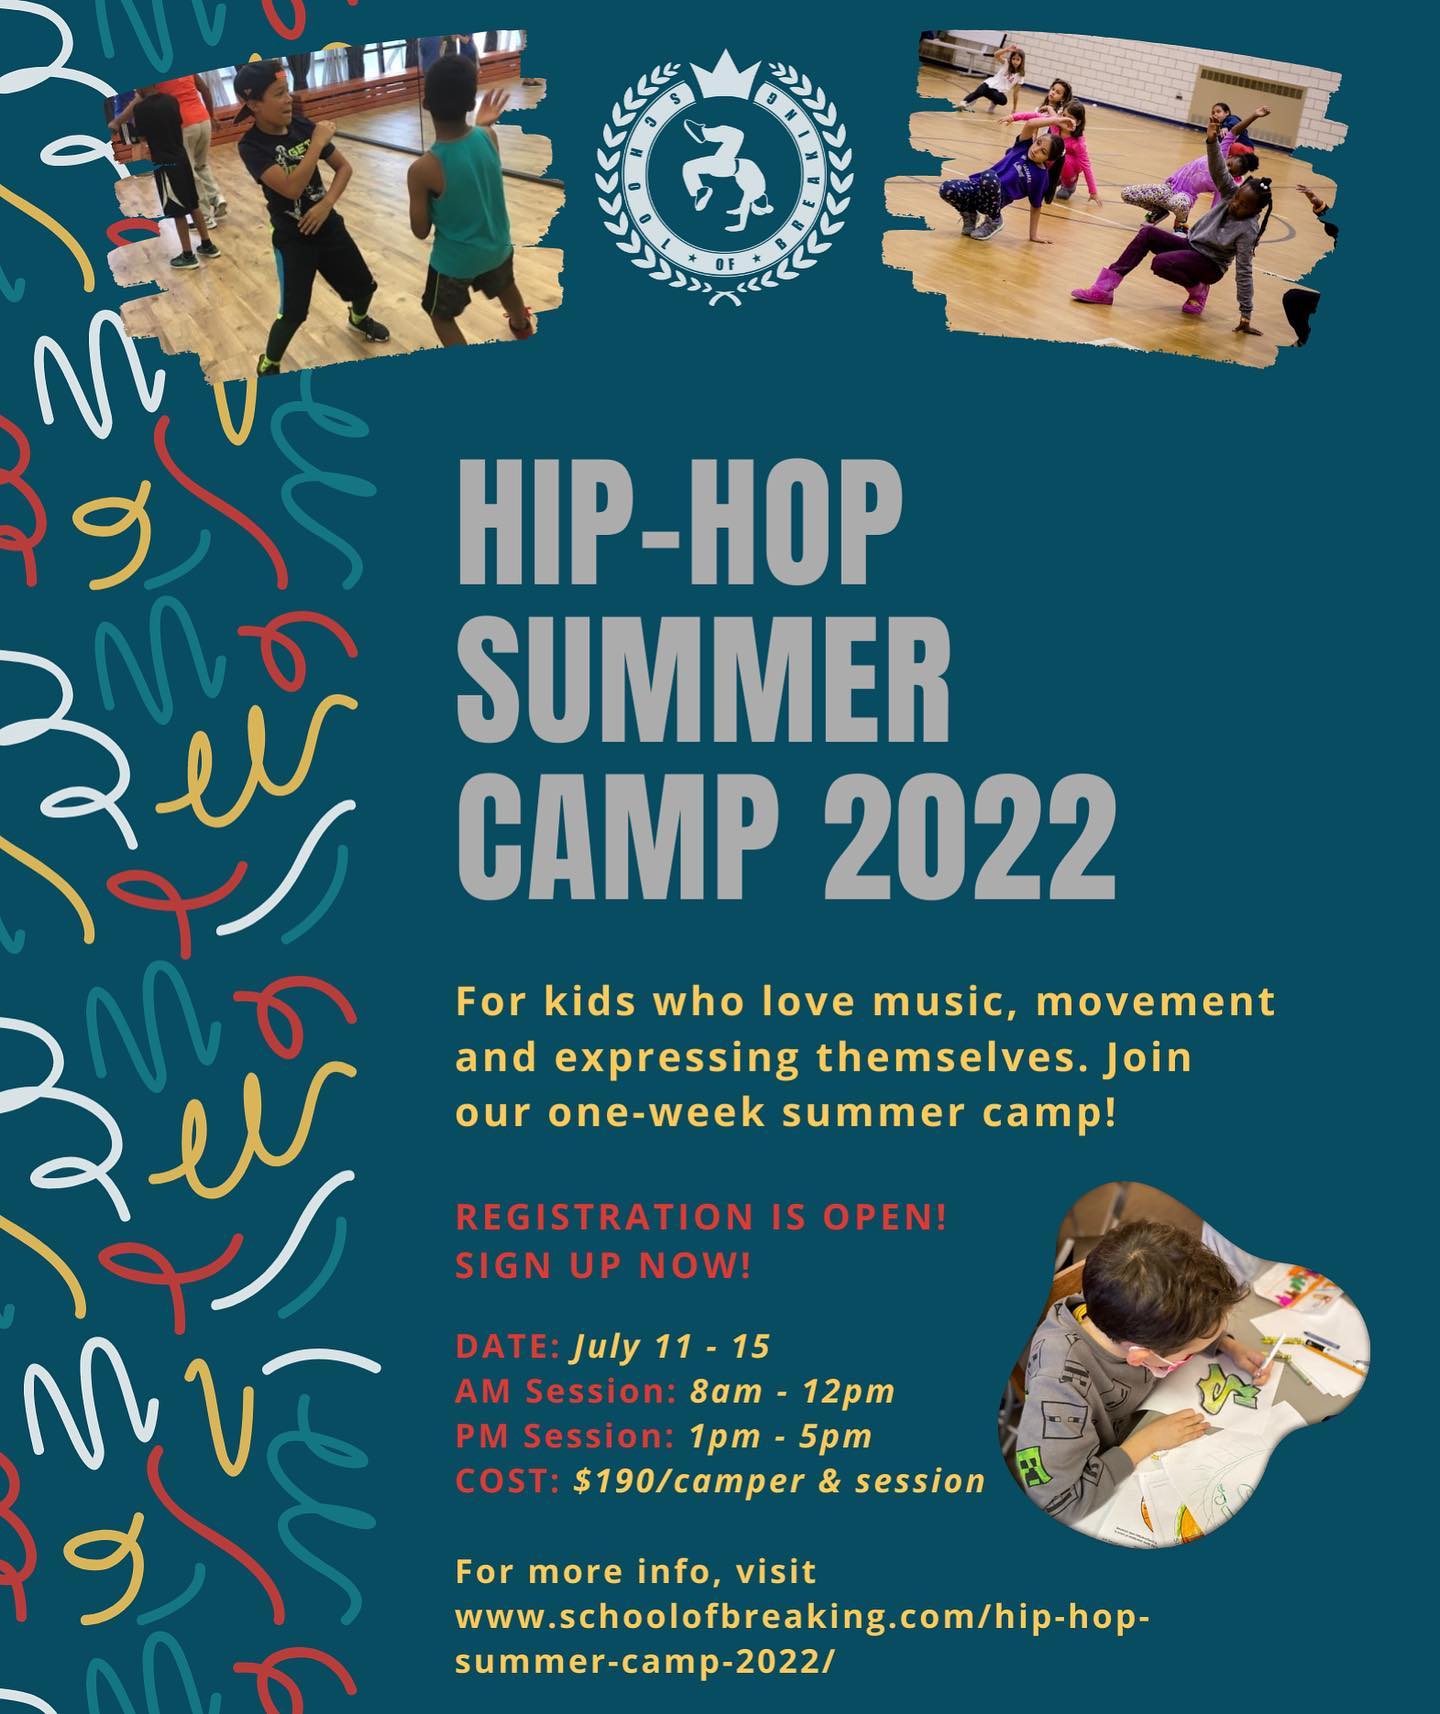 New alert 🚨 we’ve got our Hip Hop Summer Camp up next 😎

One week of exploring, dancing and having fun. Come express yourself through music and movement and learning about Hip Hop Culture 🎶💯

💥Going down July 11th - 15th 

💥Morning Hip Hop Camp 
8:00 am - 12:00 pm

💥Afternoon Hip Hop Camp
1:00 pm - 5:00 pm

To register for our Hip Hop Summer Camp link in bio 📲 

#schoolofbreaking #HipHop #summercamp #streetdance #freestyle #breaking #bboy #bgirl #explore #movement #music #culture #art #peace #love #unity #havingfun